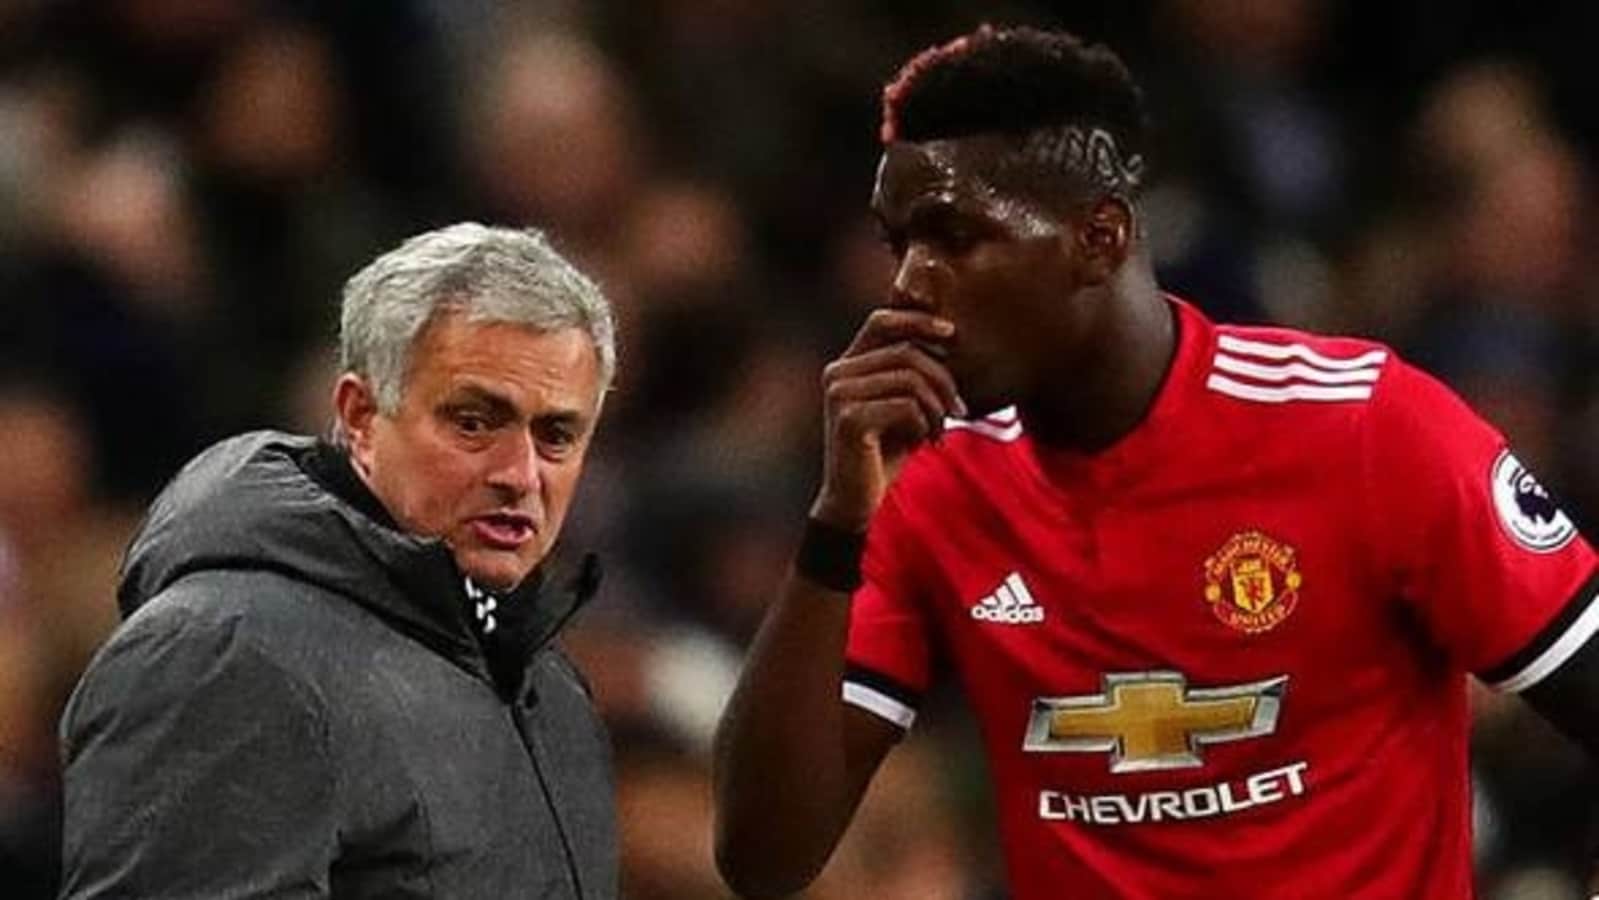 'I told him are you serious? Who do you think I am?': Paul Pogba recalls Jose Mourinho fall out at Manchester United